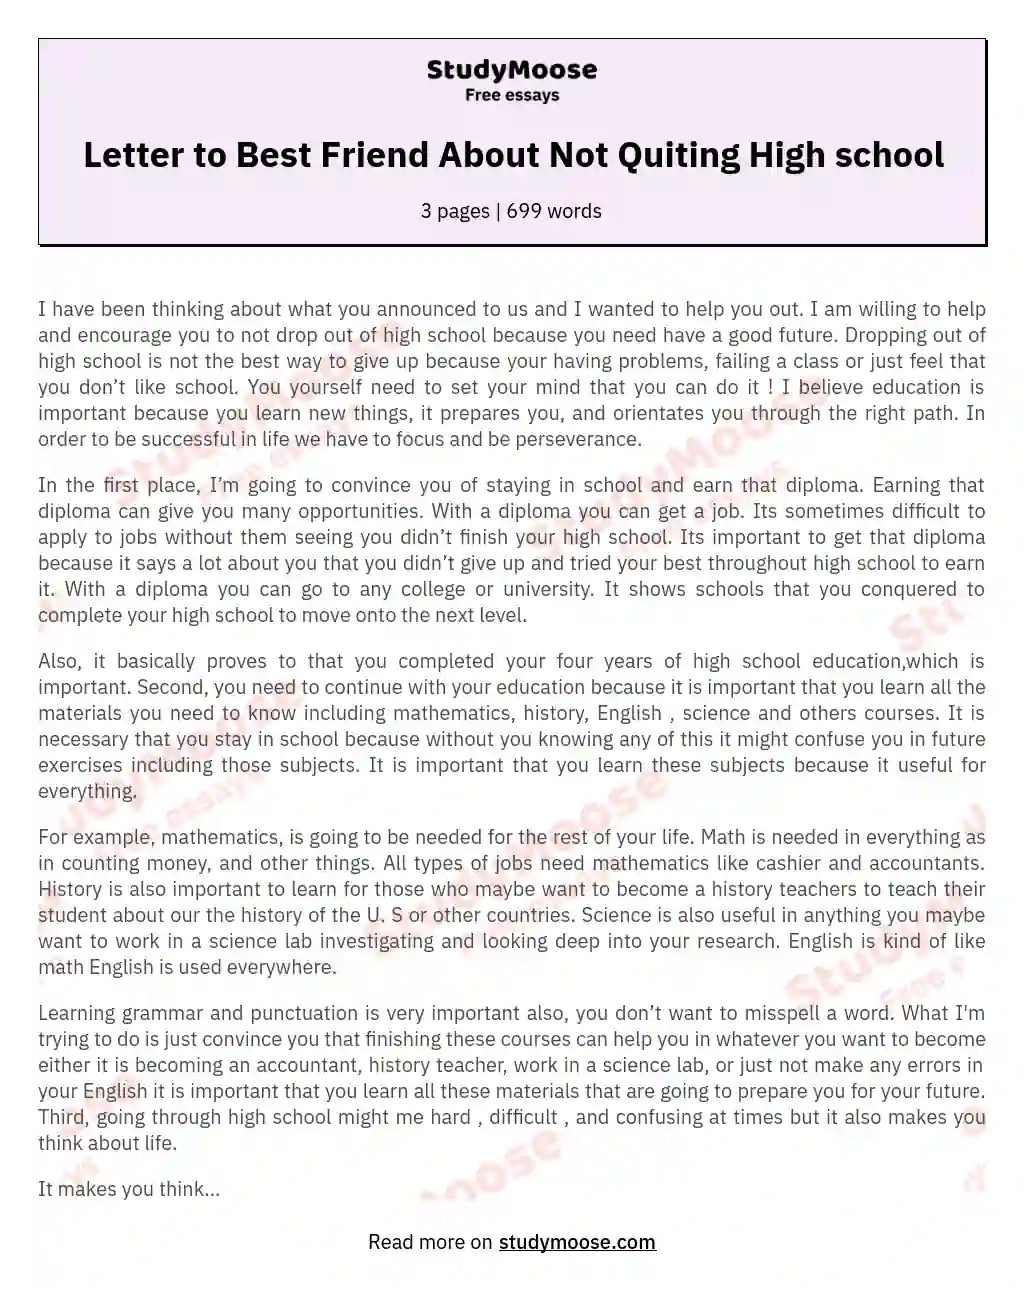 Letter to Best Friend About Not Quiting High school essay